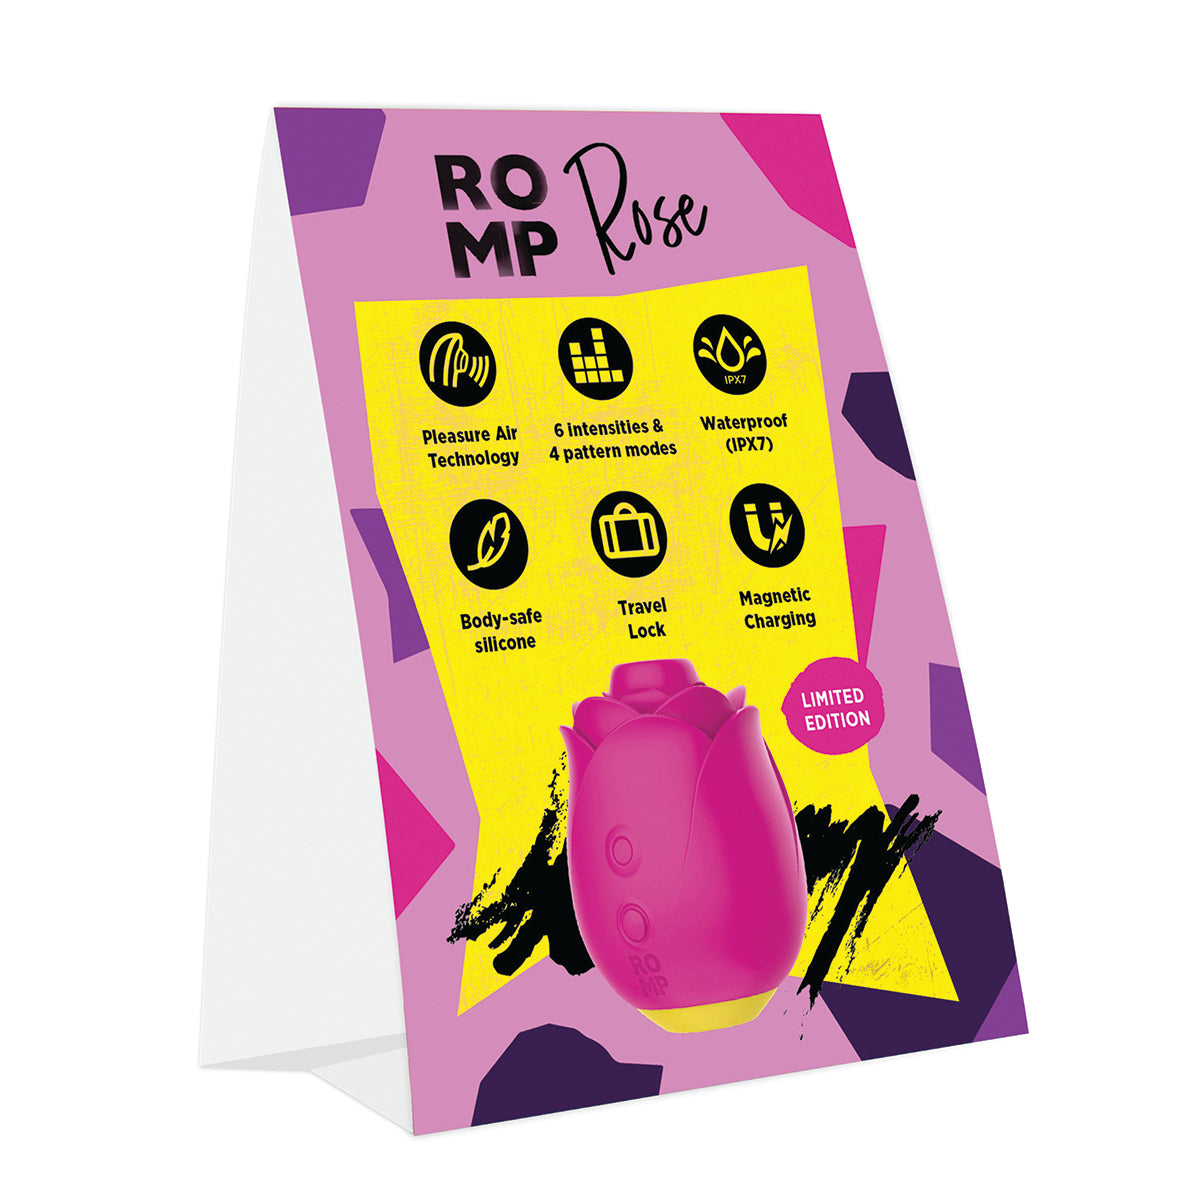 ROMP - Rose – Table Tent Card - English